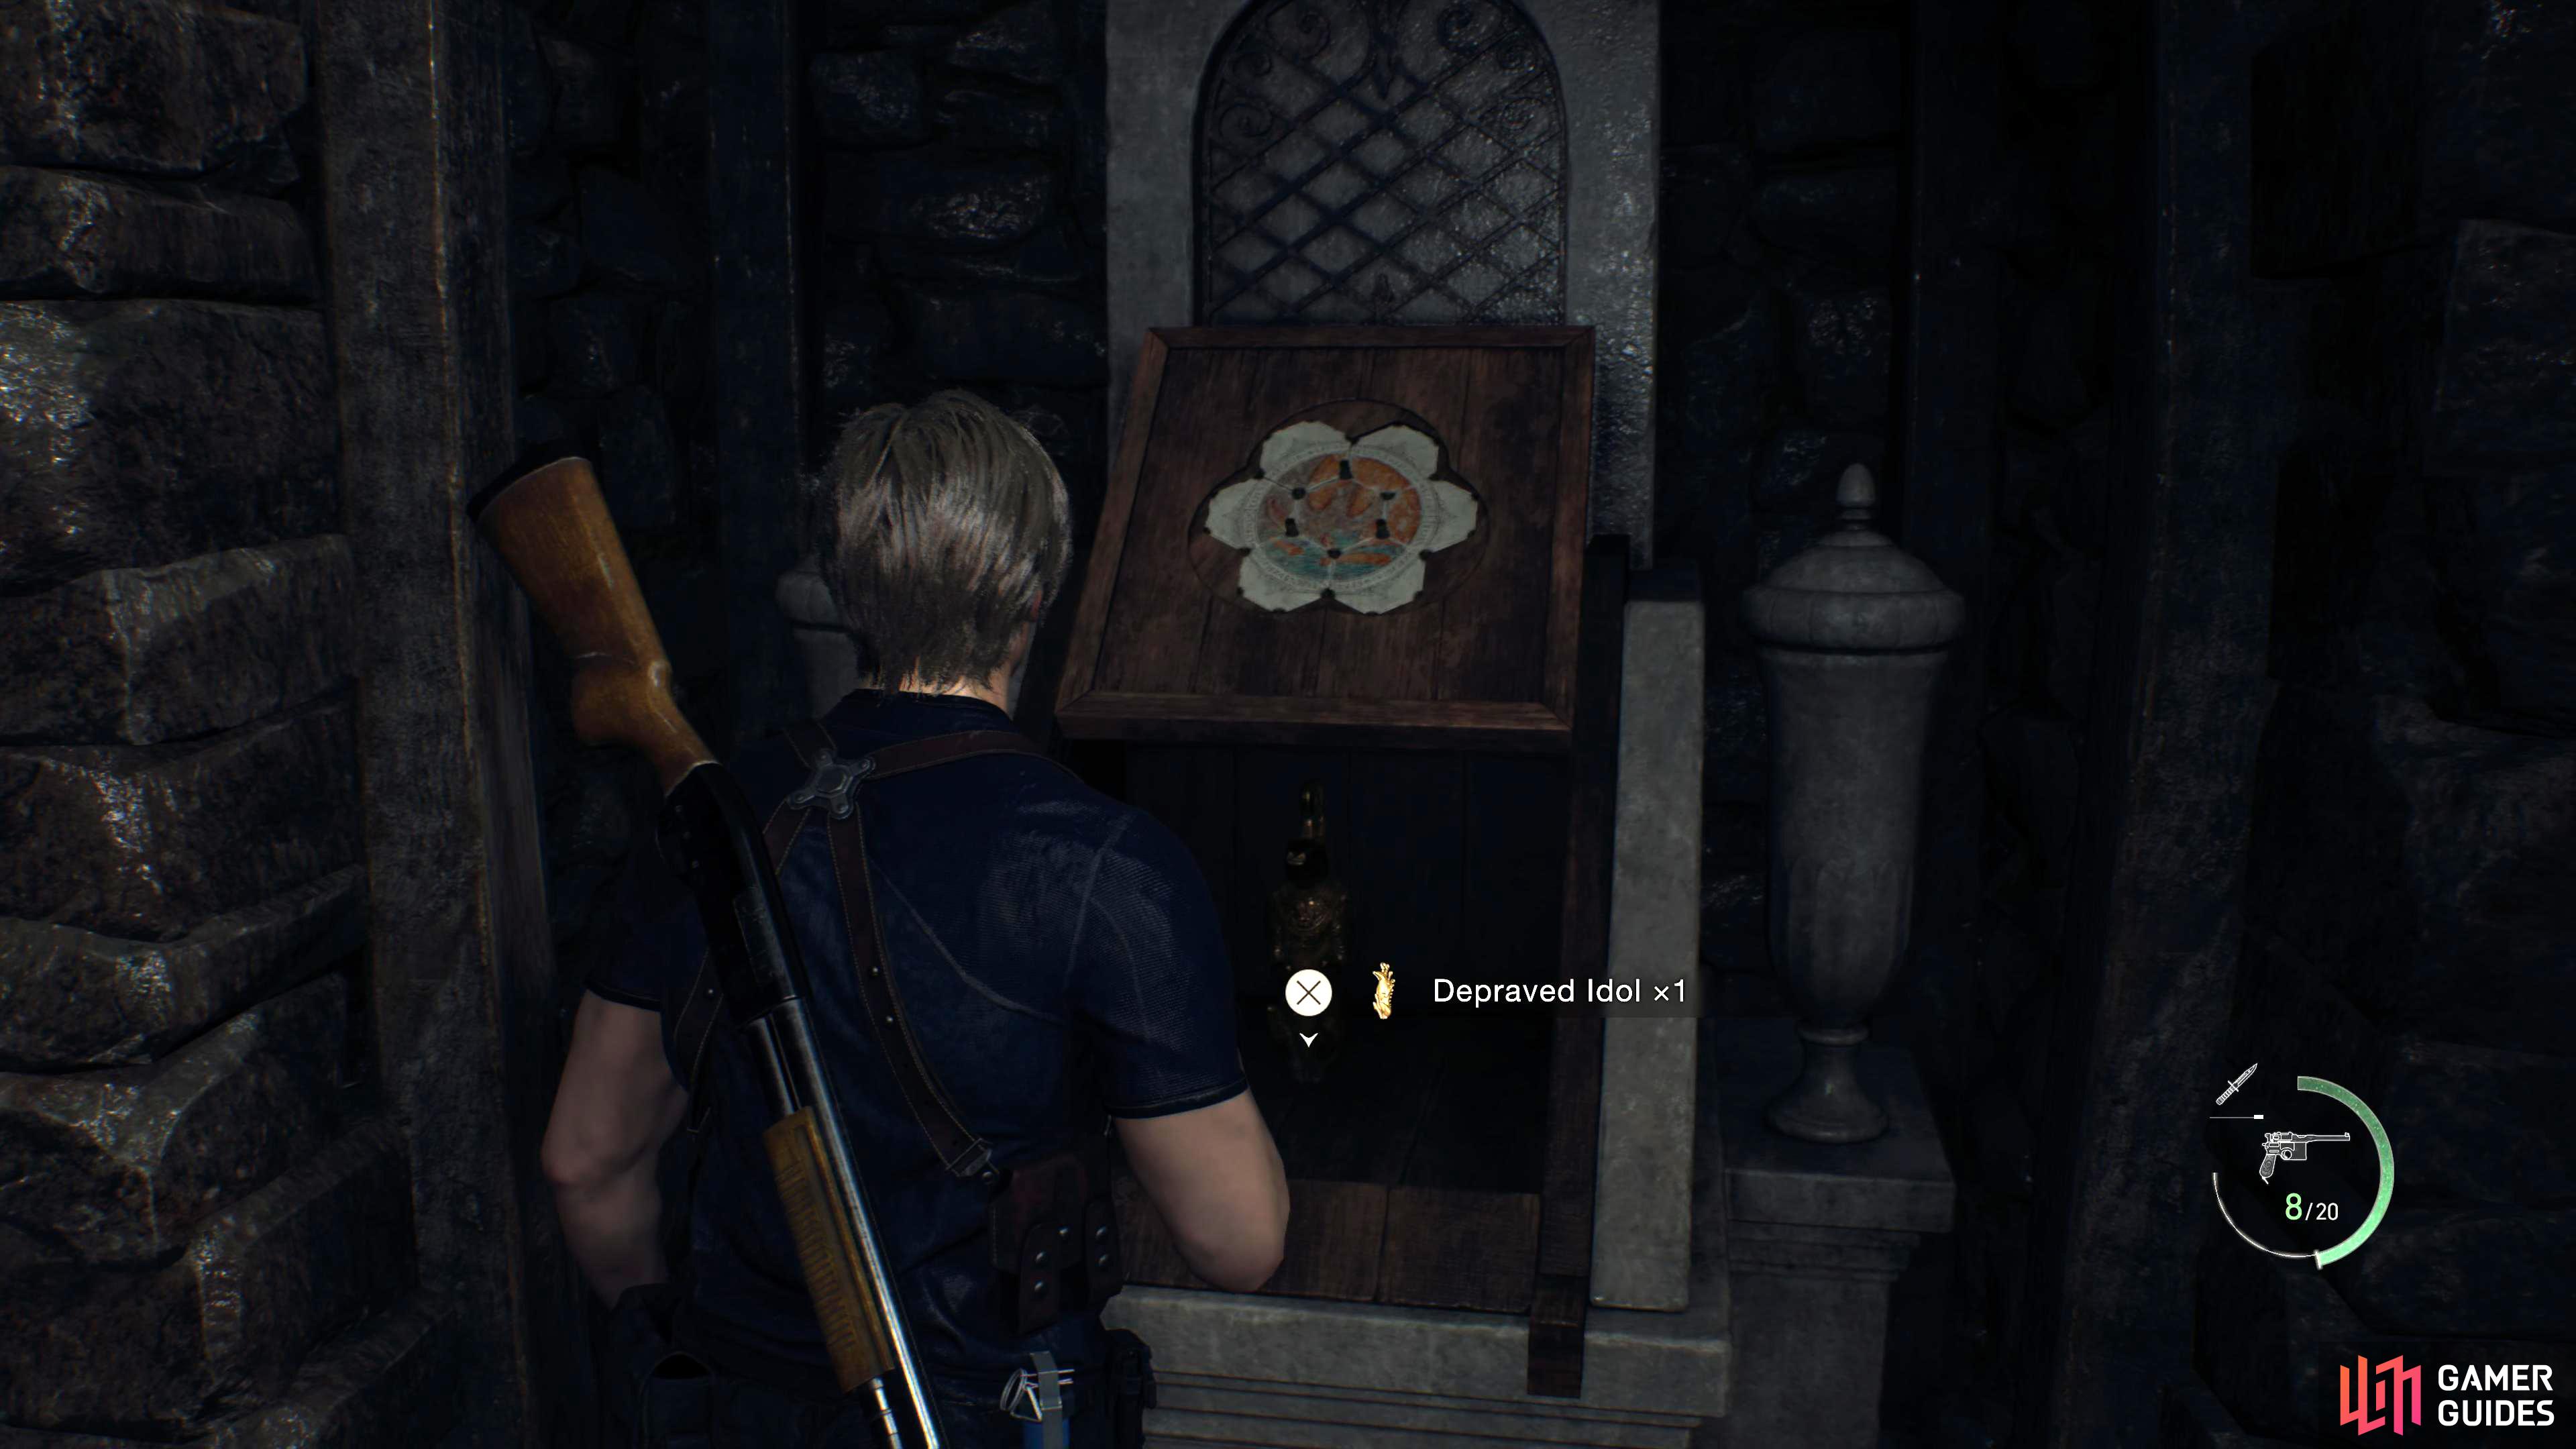 How to solve the Resident Evil 4 remake church puzzle - Dexerto